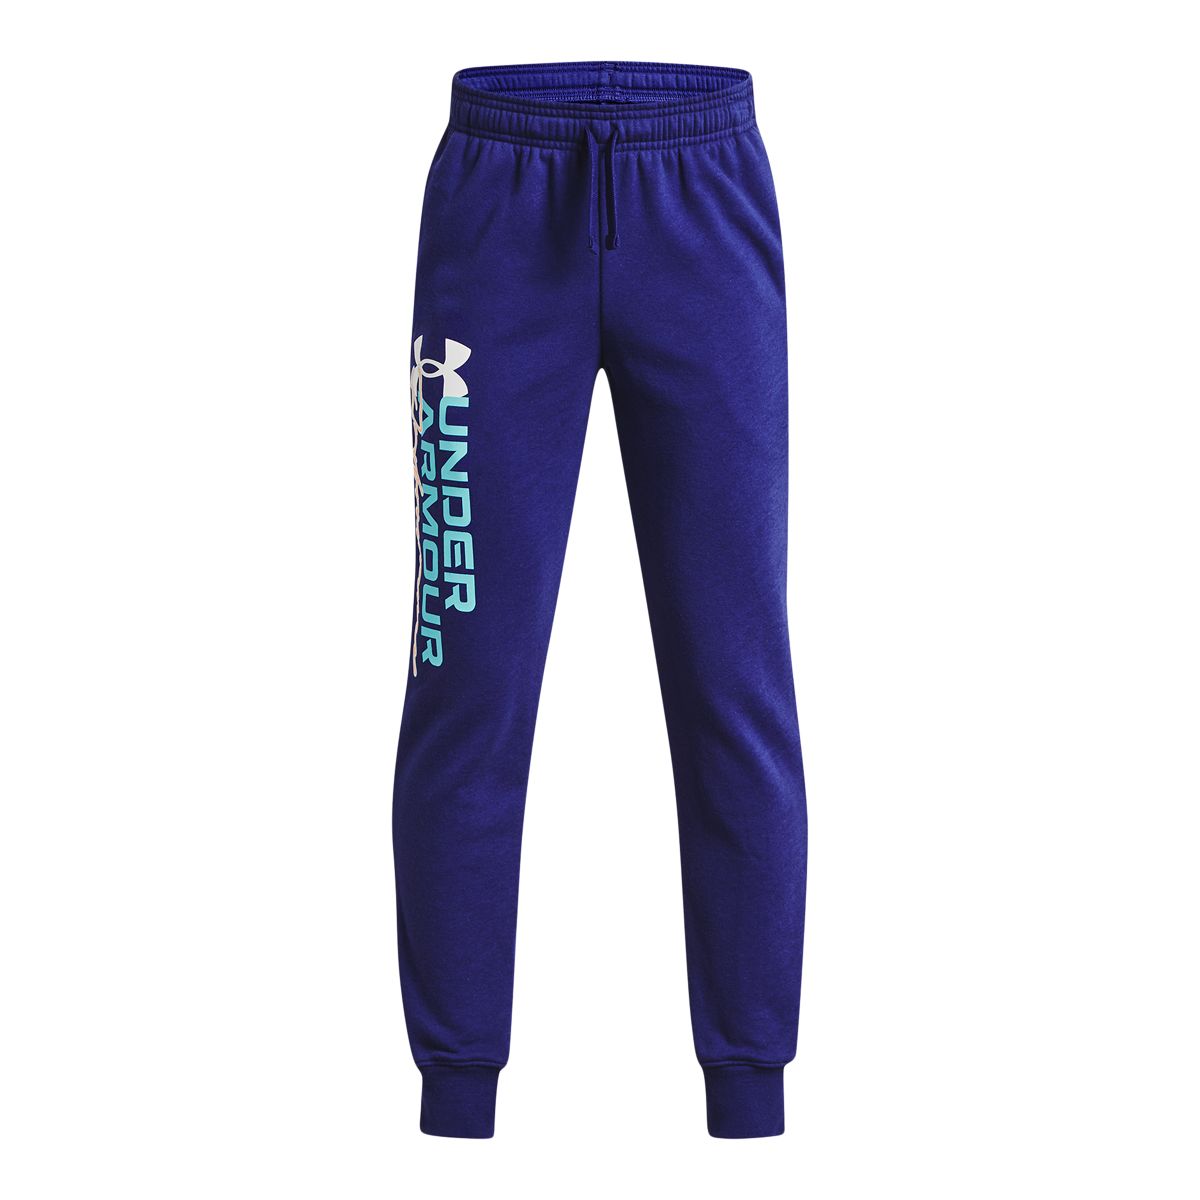 Men's Rival Fleece Jogger Pant from Under Armour